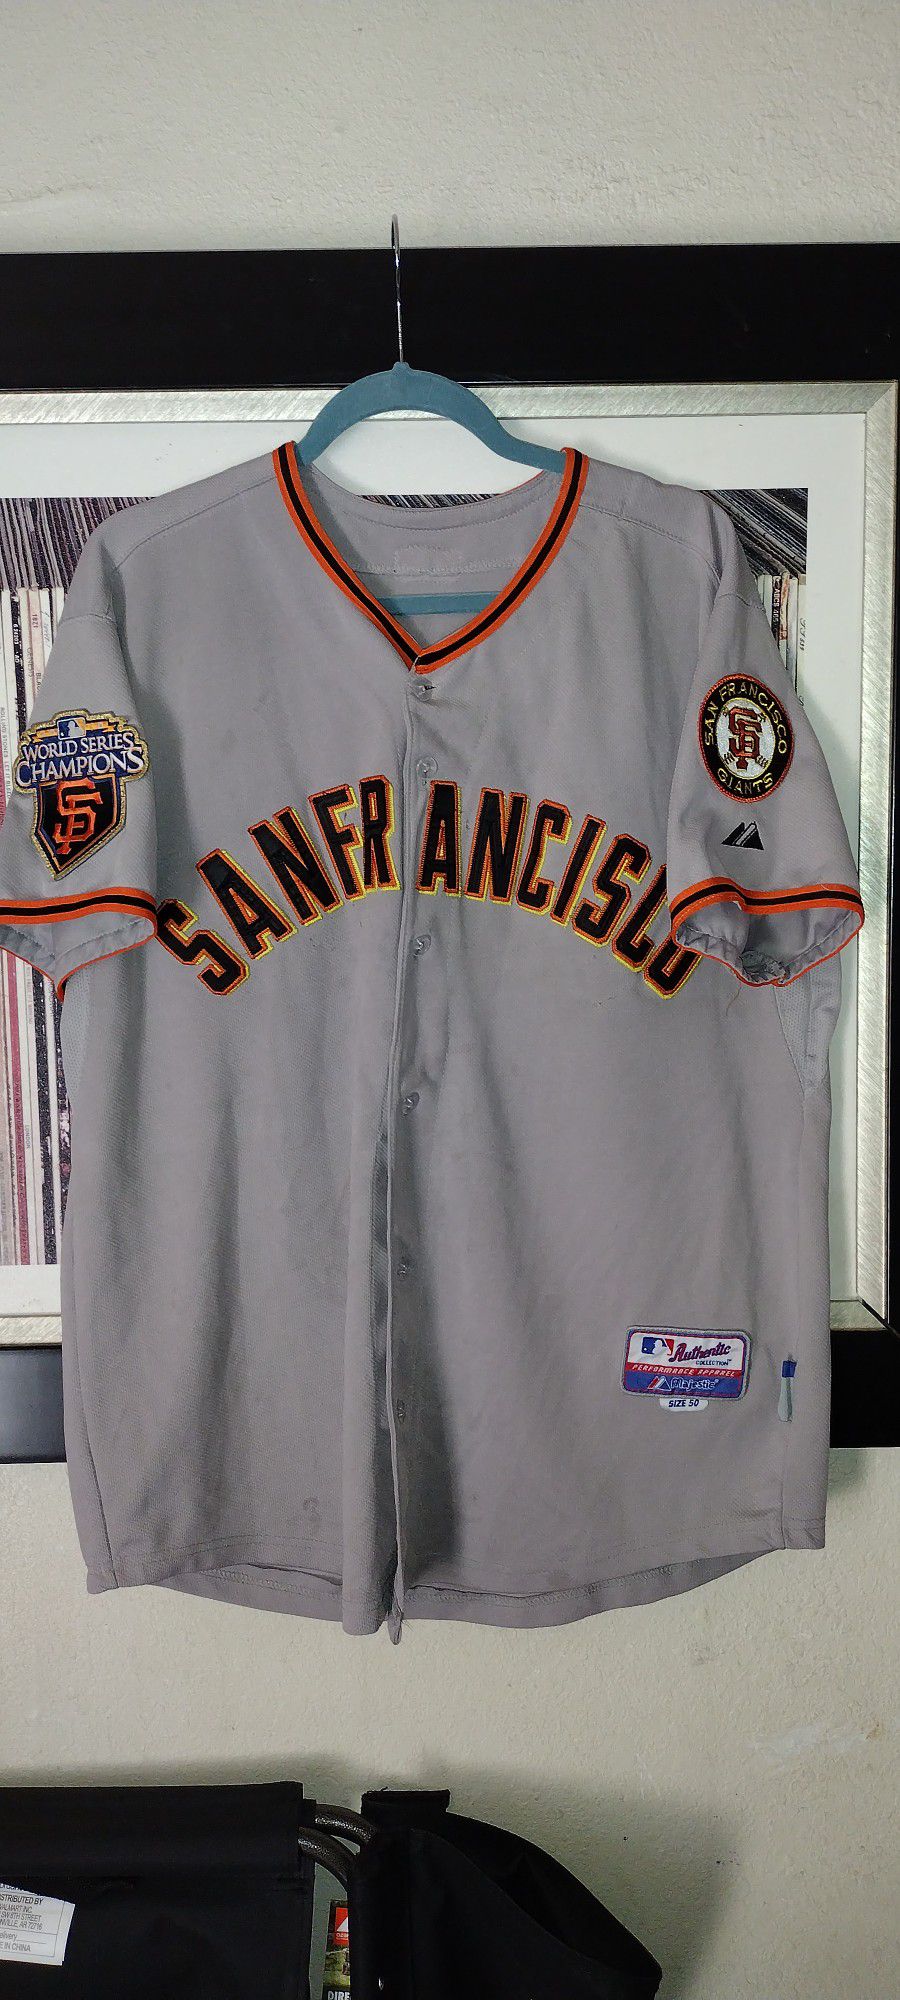 Buster Posey Autographed 2014 World Series Jersey for Sale in San Diego, CA  - OfferUp